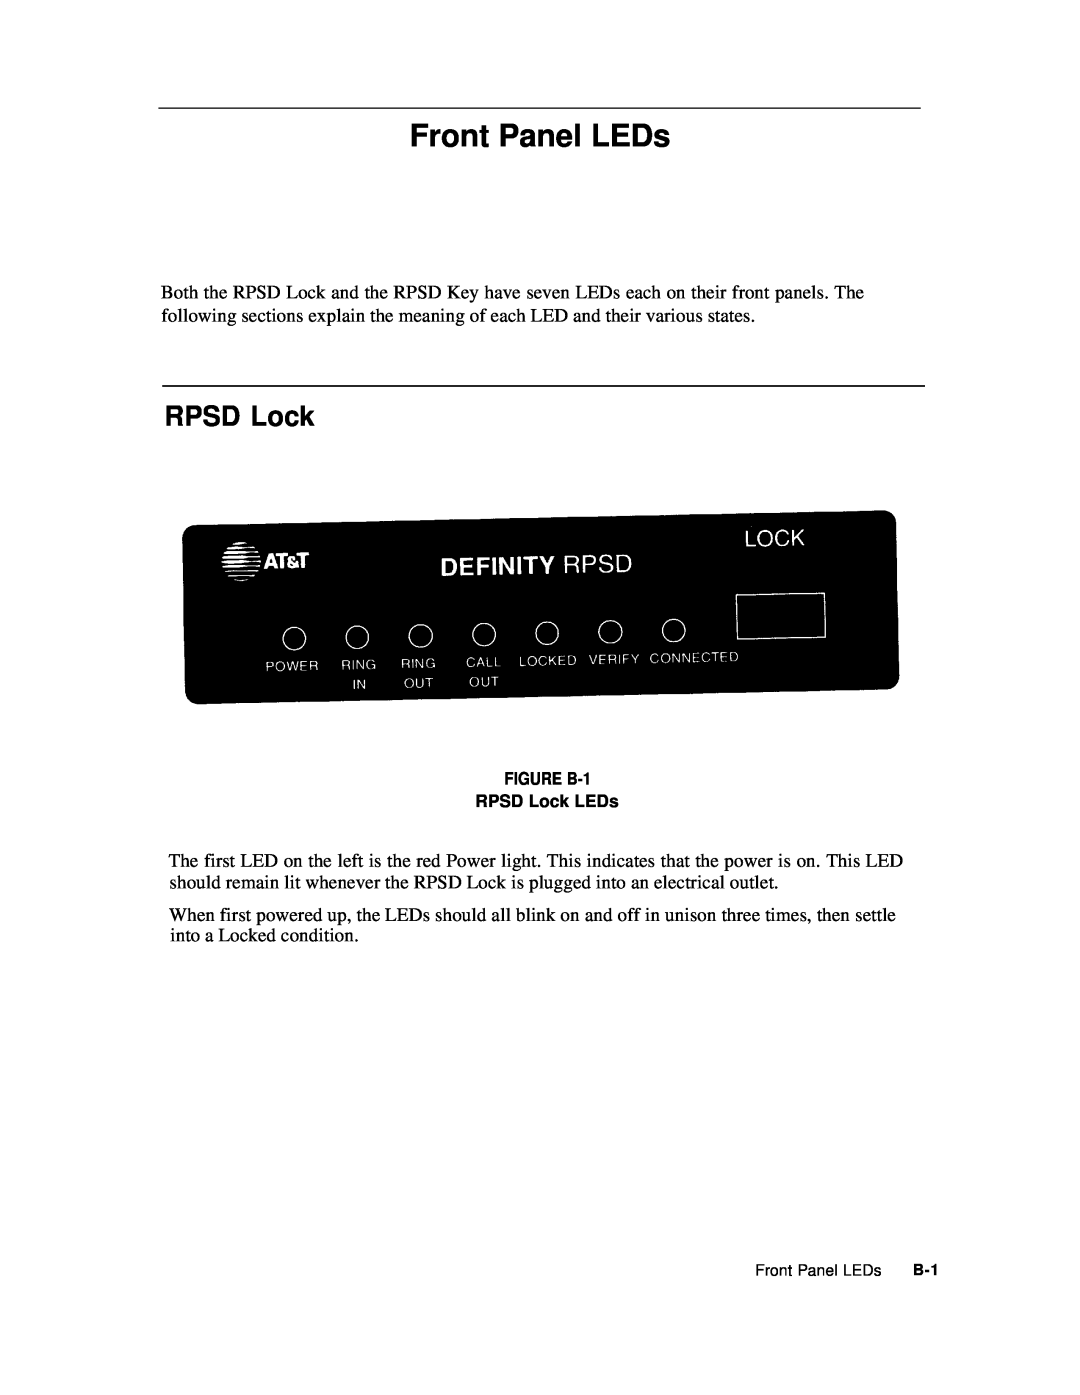 AT&T Remote Port Security Device user manual Front Panel LEDs, FIGURE B-1 RPSD Lock LEDs 